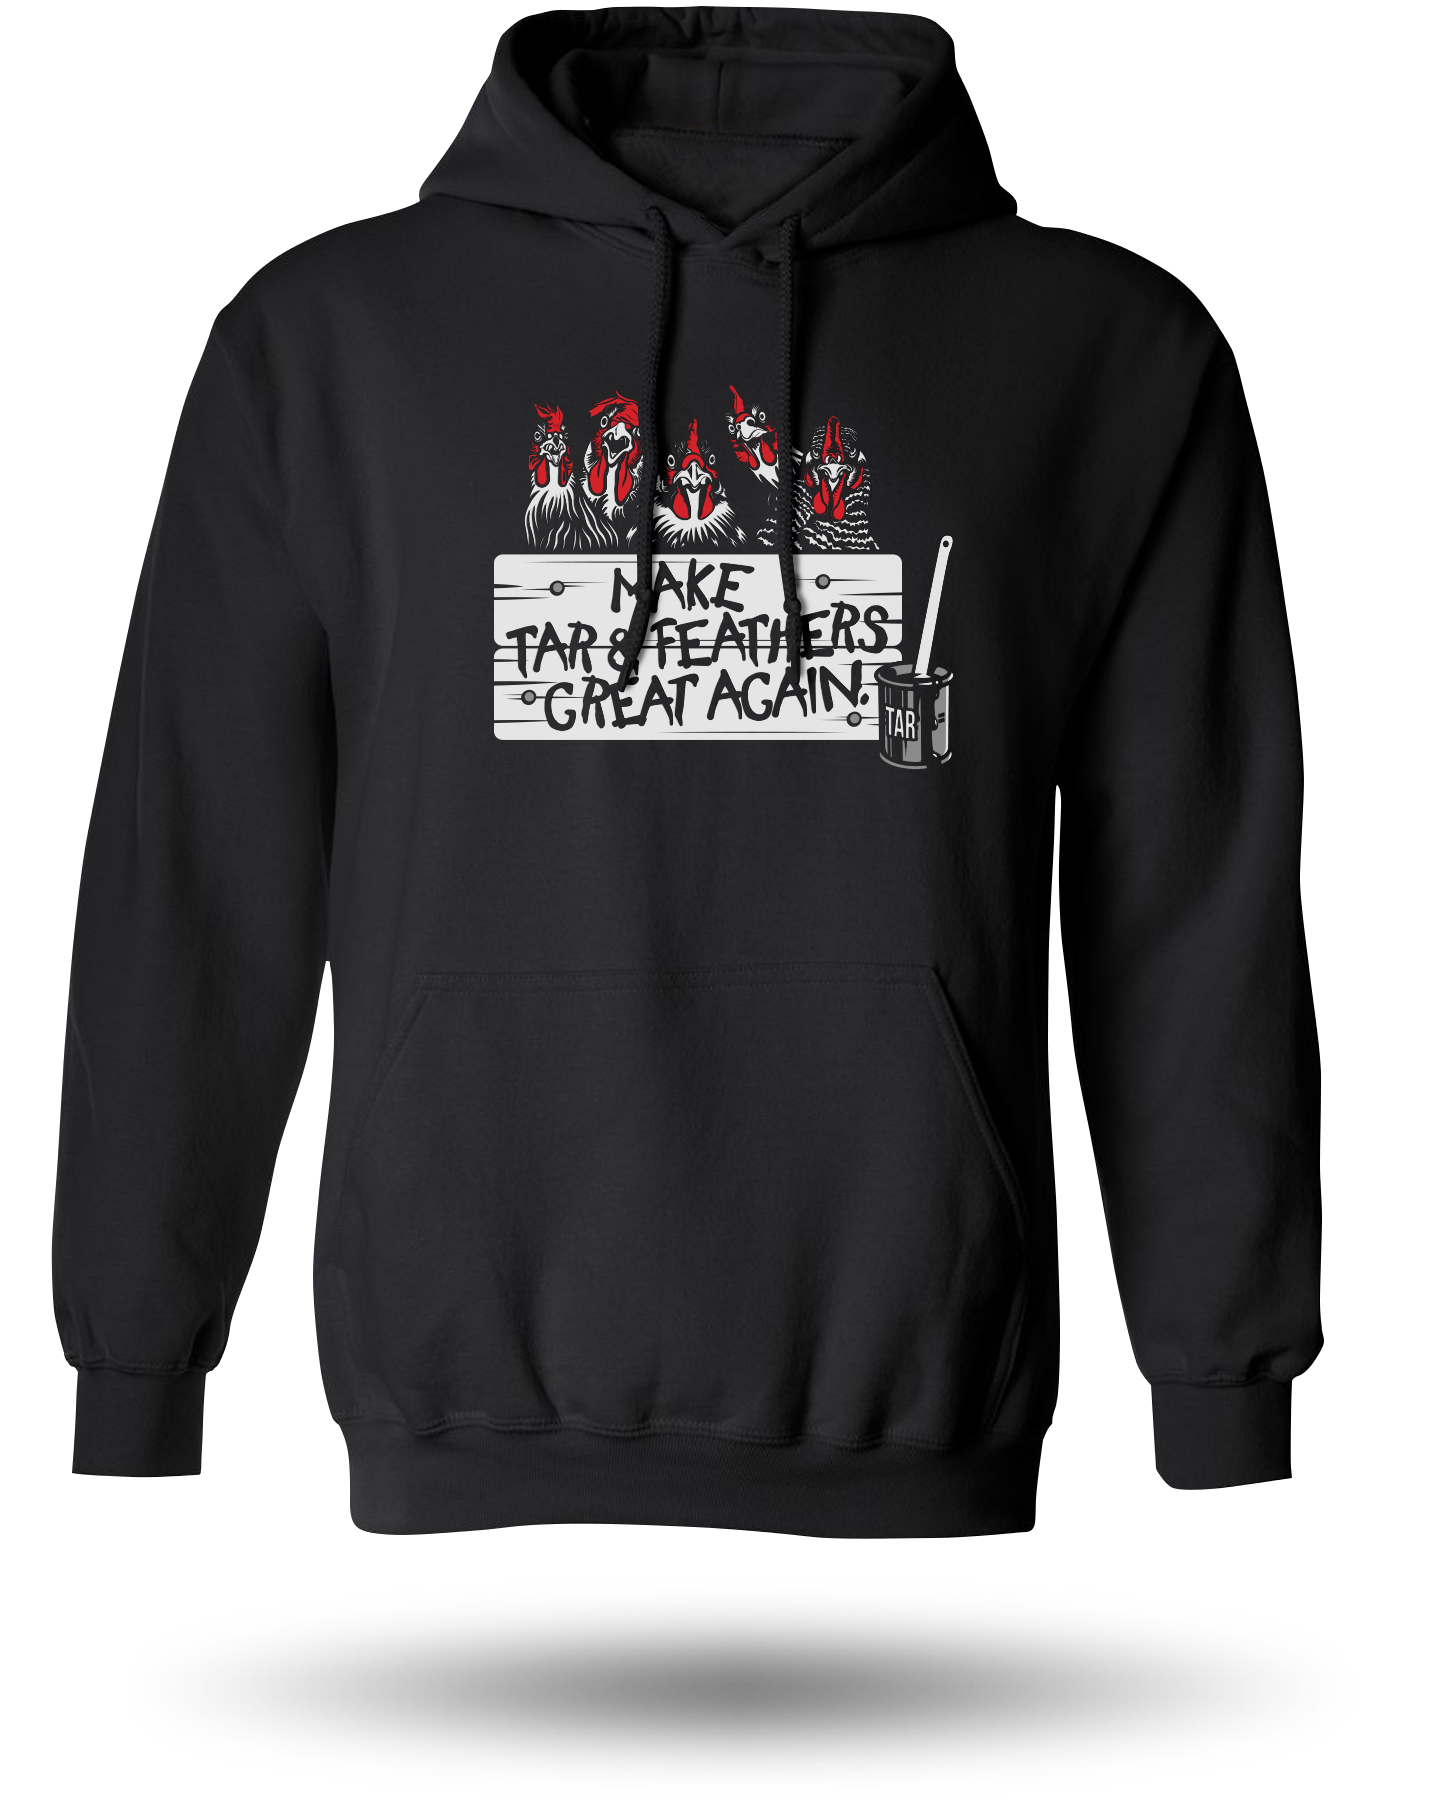 MAKE TAR AND FEATHERS GREAT AGAIN HOODIE